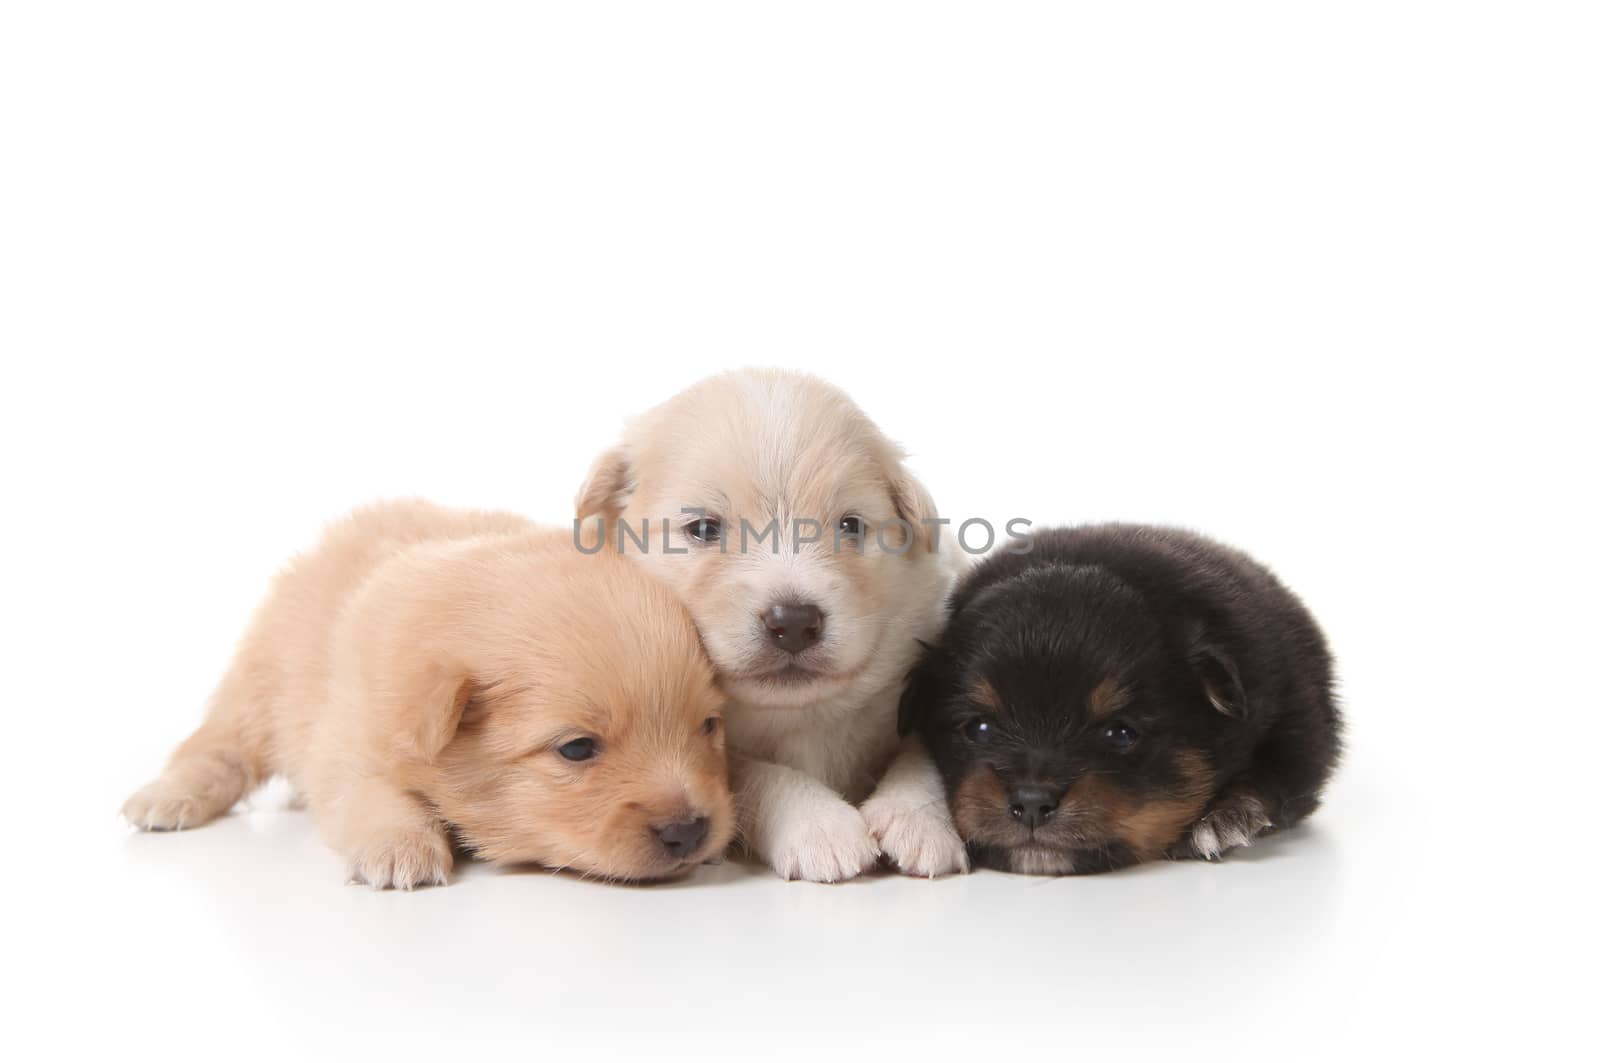 Tired Sweet and Cuddly Newborn Puppies by tobkatrina